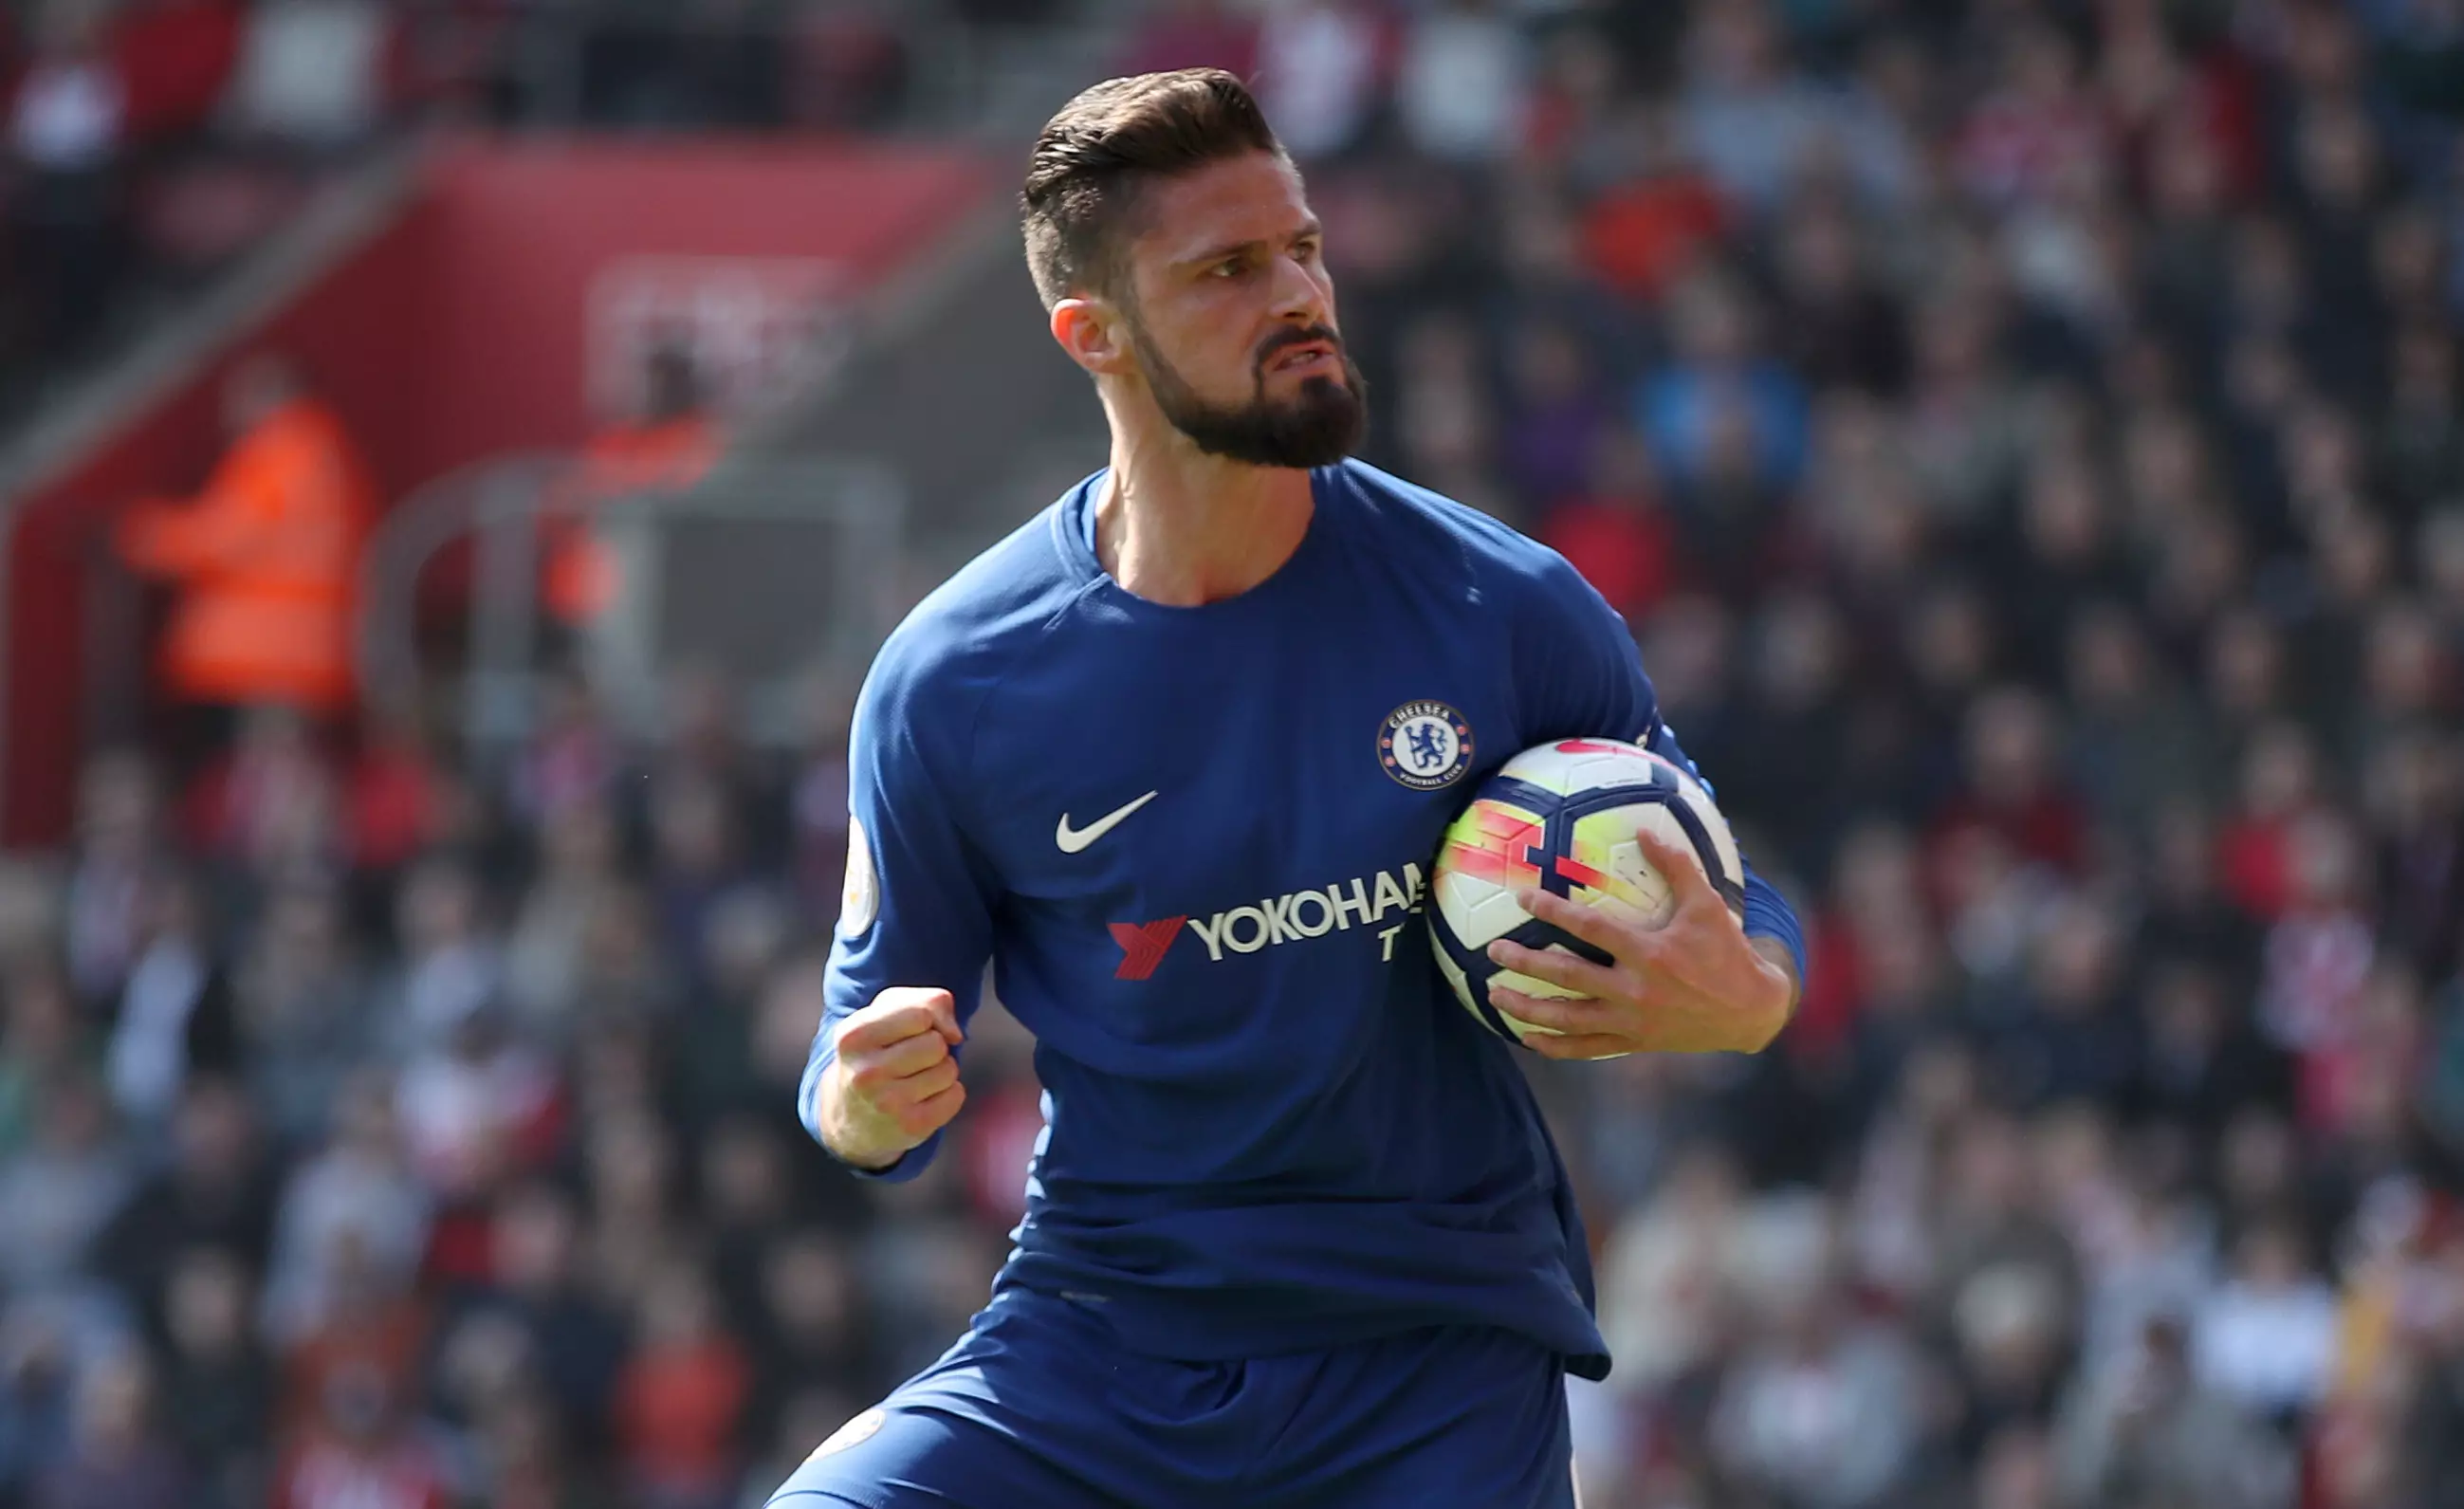 Giroud is one of those players whose contract expires on June 30th. Image: PA Images